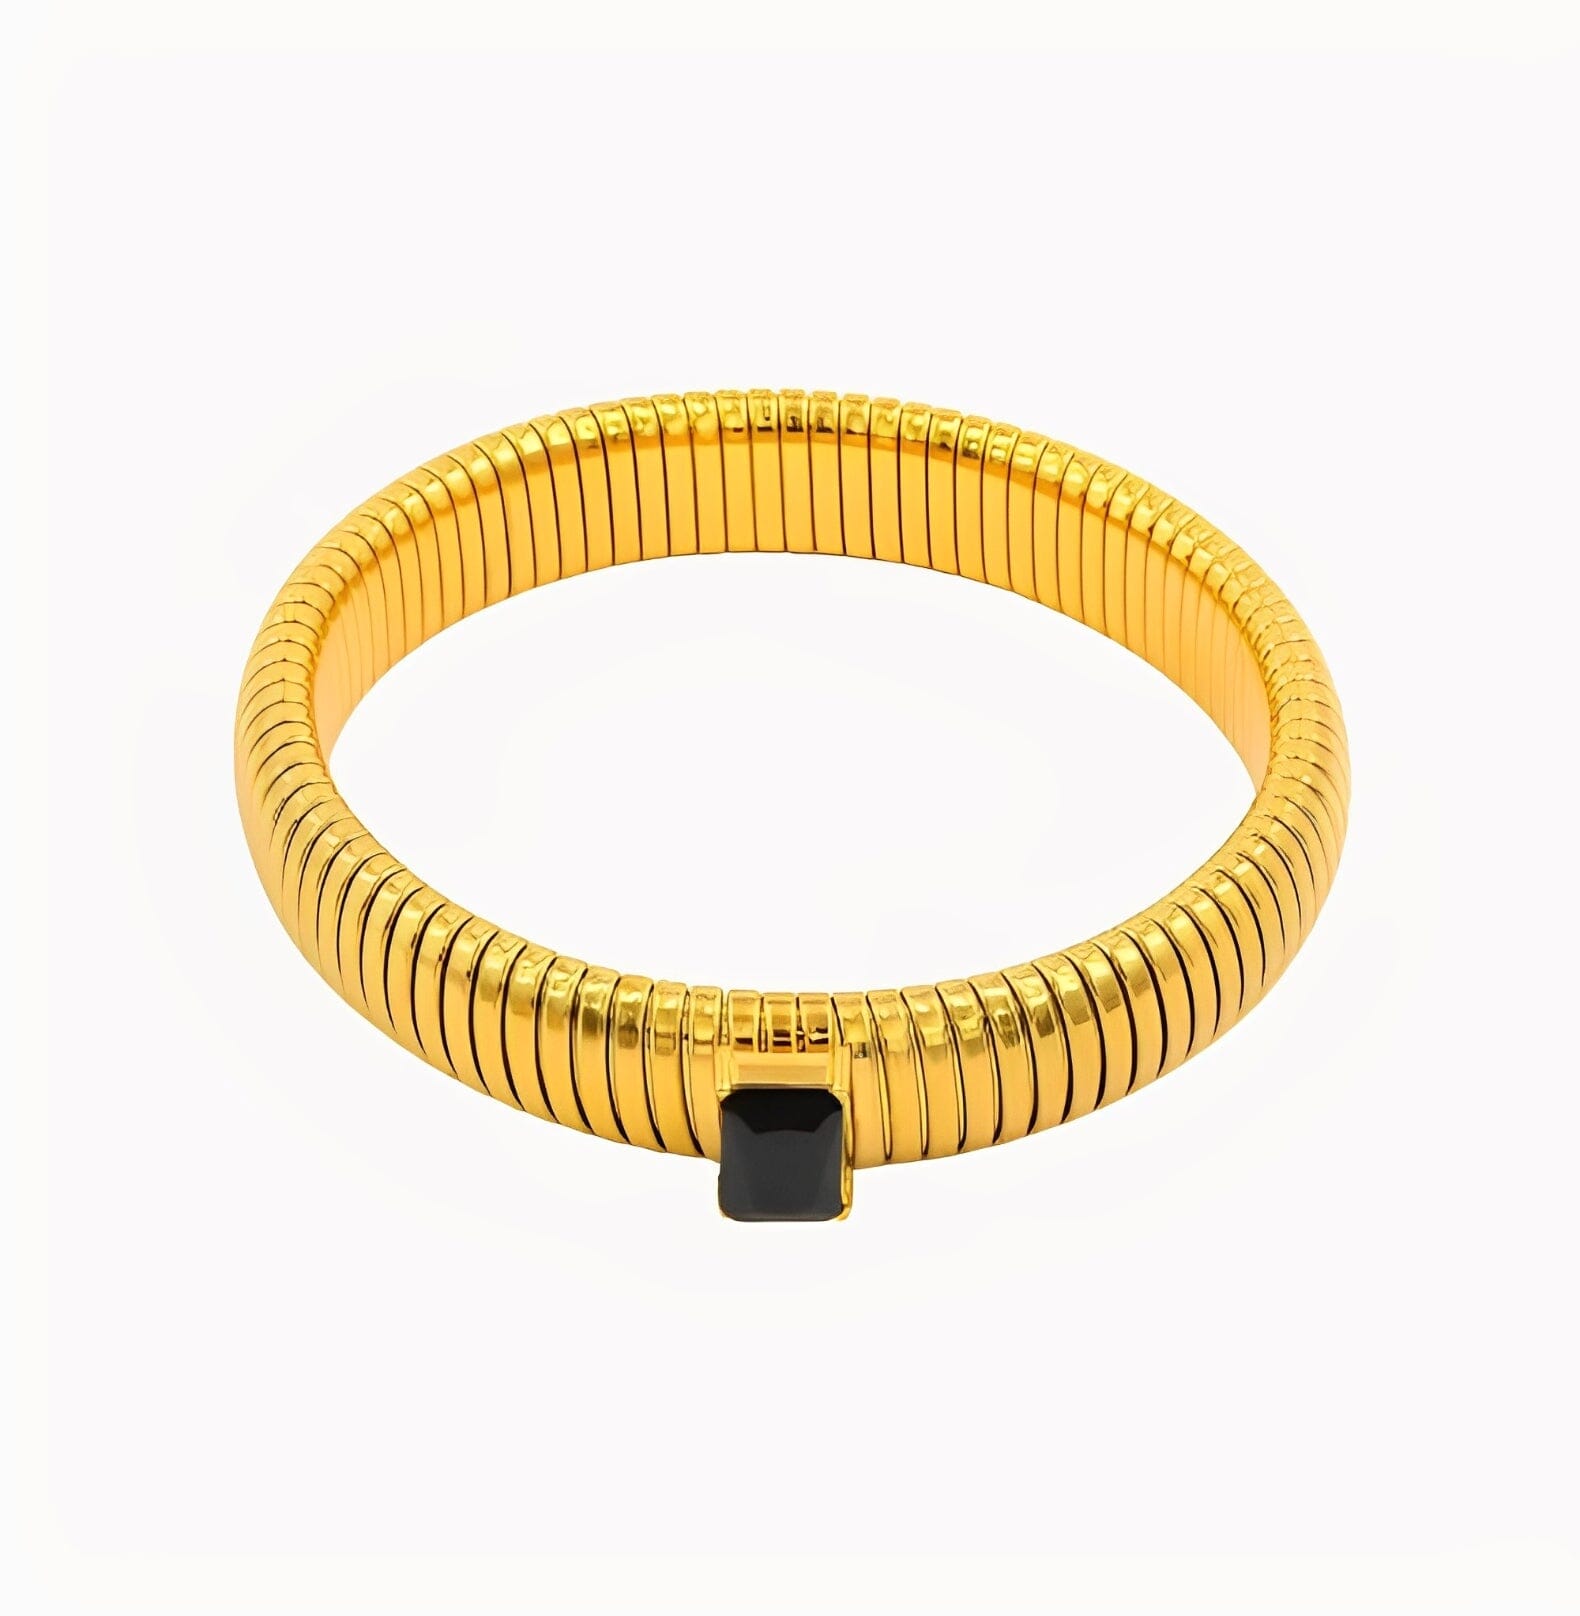 CHUNKY STONE BANGLE BRACELET - GOLD braclet Yubama Jewelry Online Store - The Elegant Designs of Gold and Silver ! 